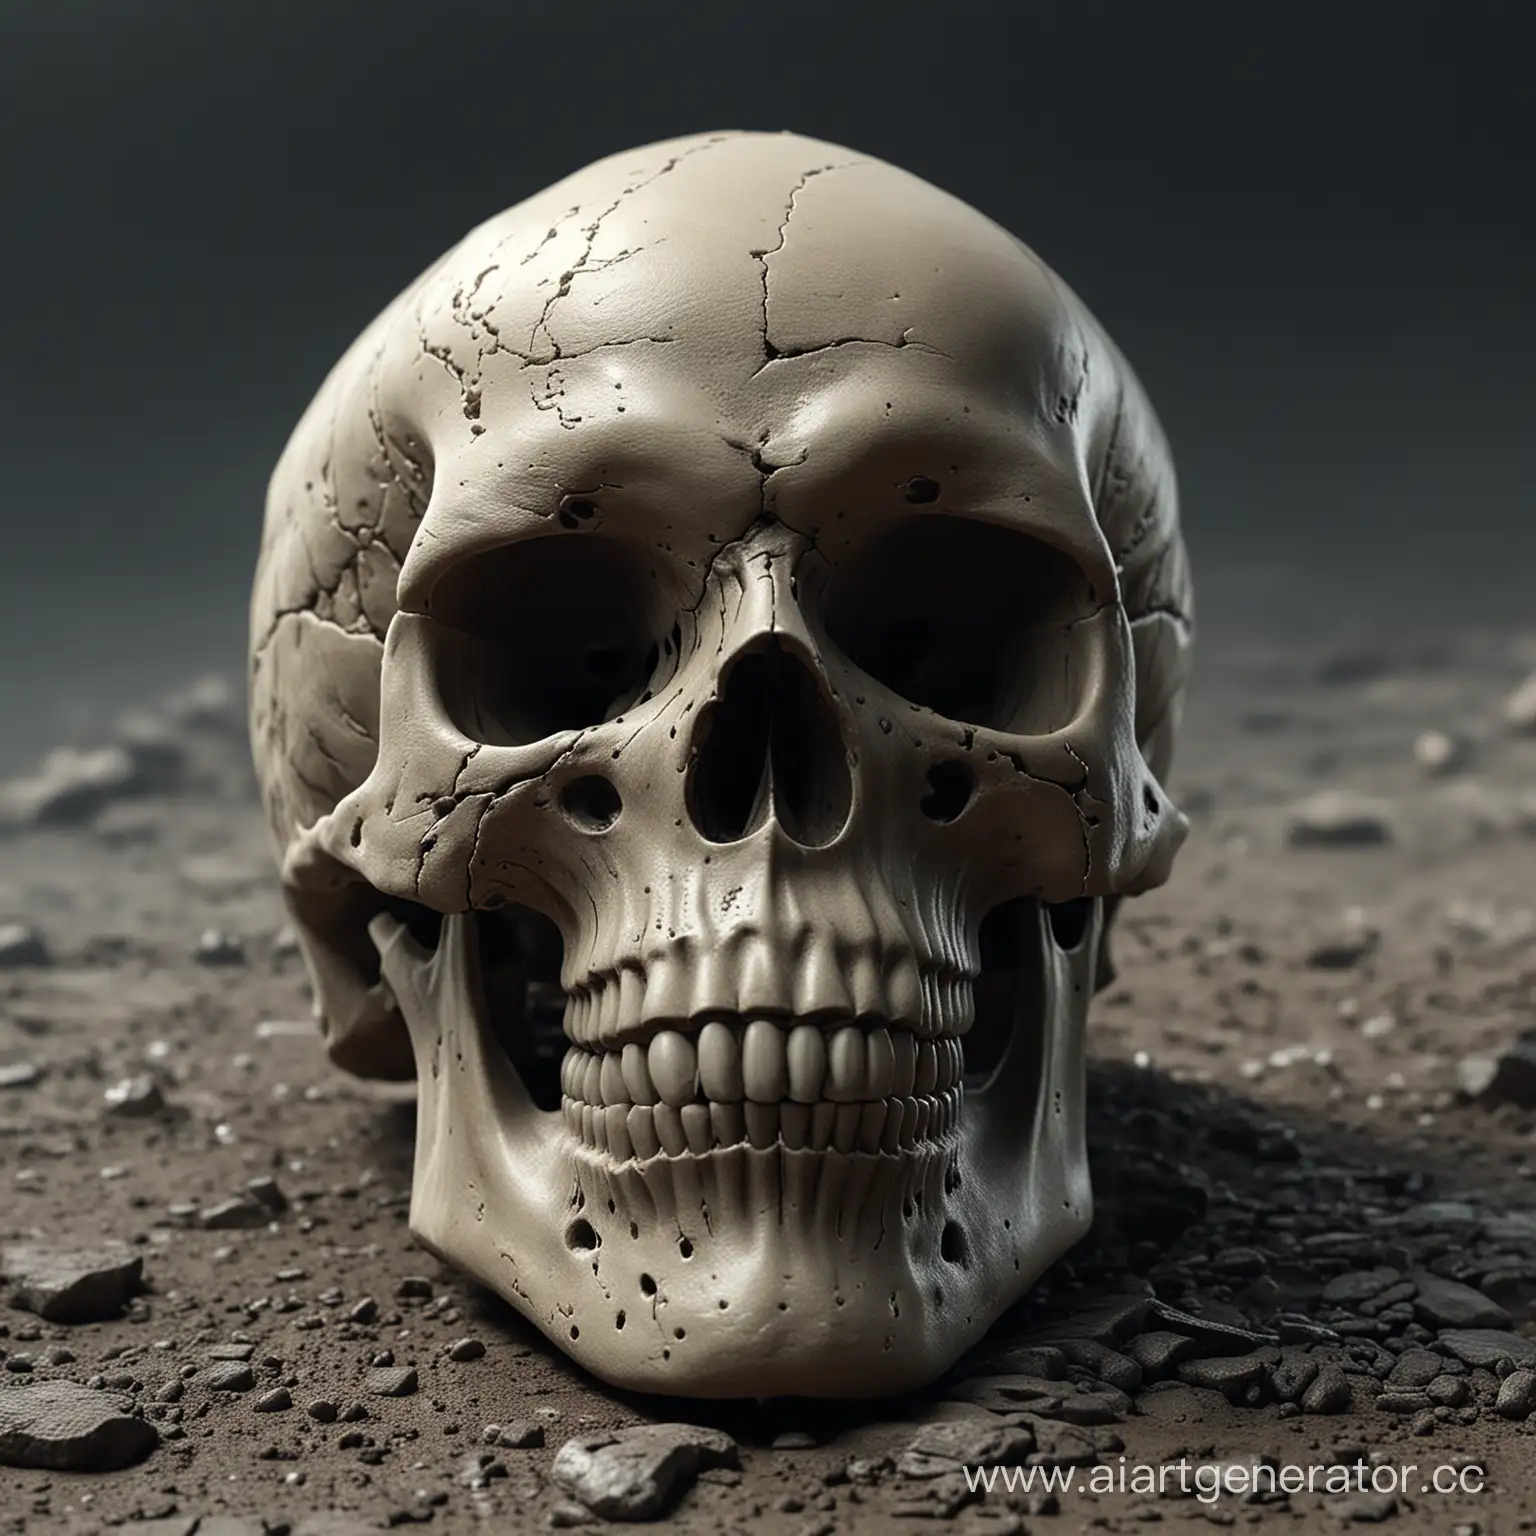 Detailed-4K-Skull-Illustration-with-Realistic-Features